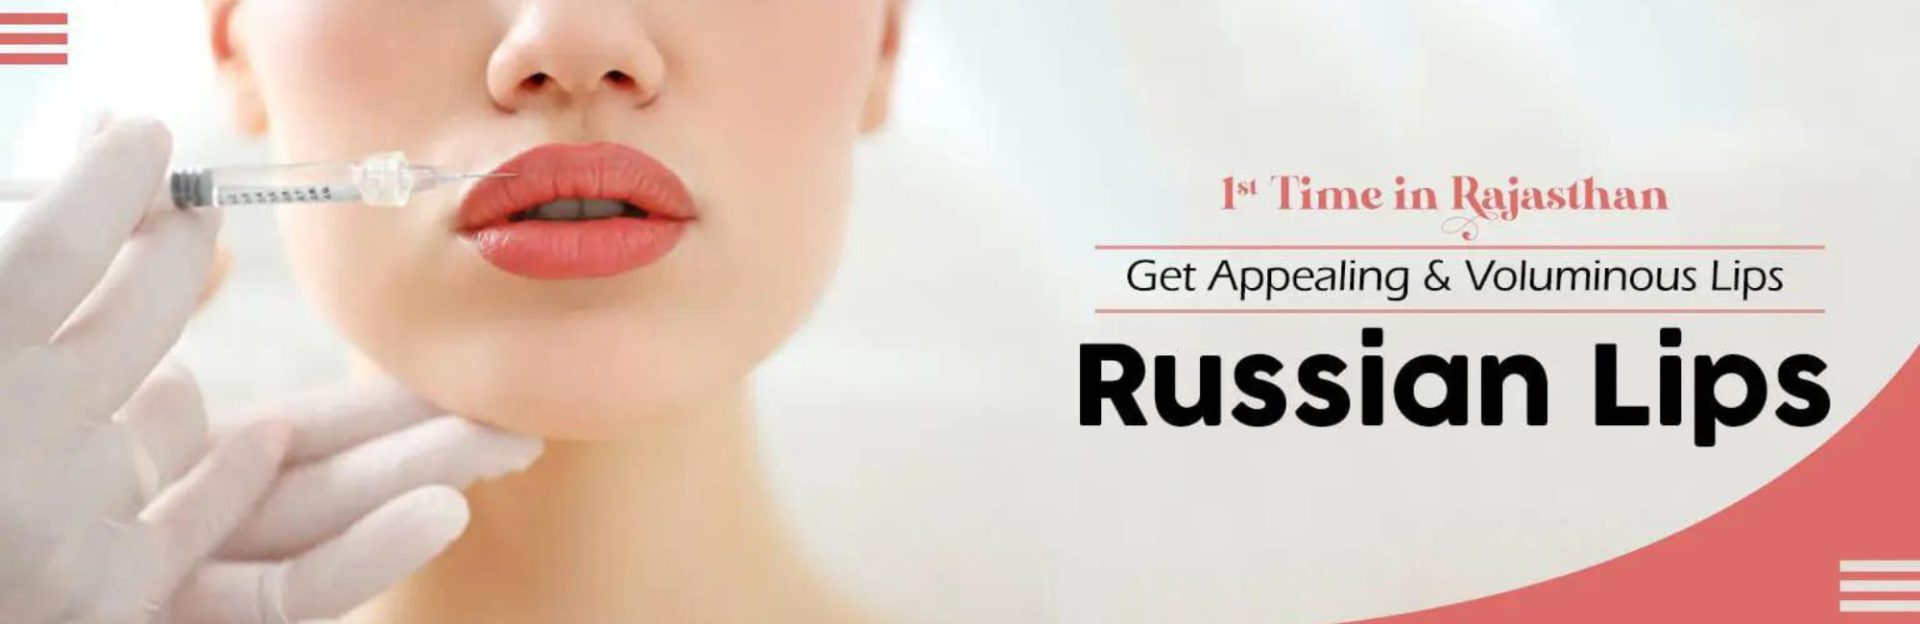 Russian Lips Treatment In Udaipur, Lip Augmentation Treatment in Udaipur